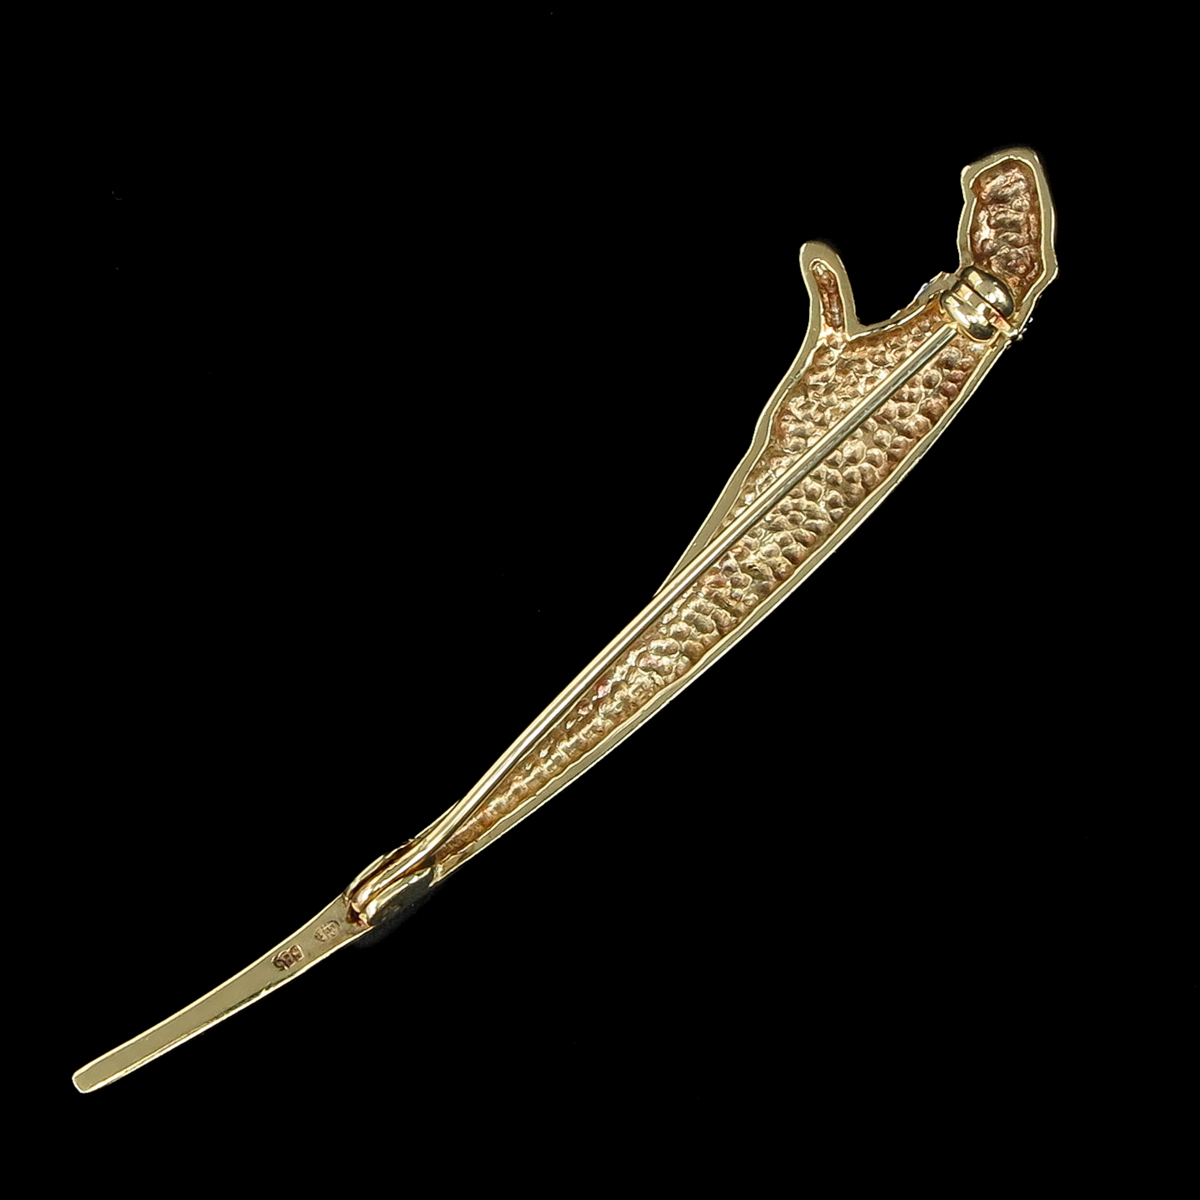 A 14k Gold Panther Brooch - Image 2 of 3